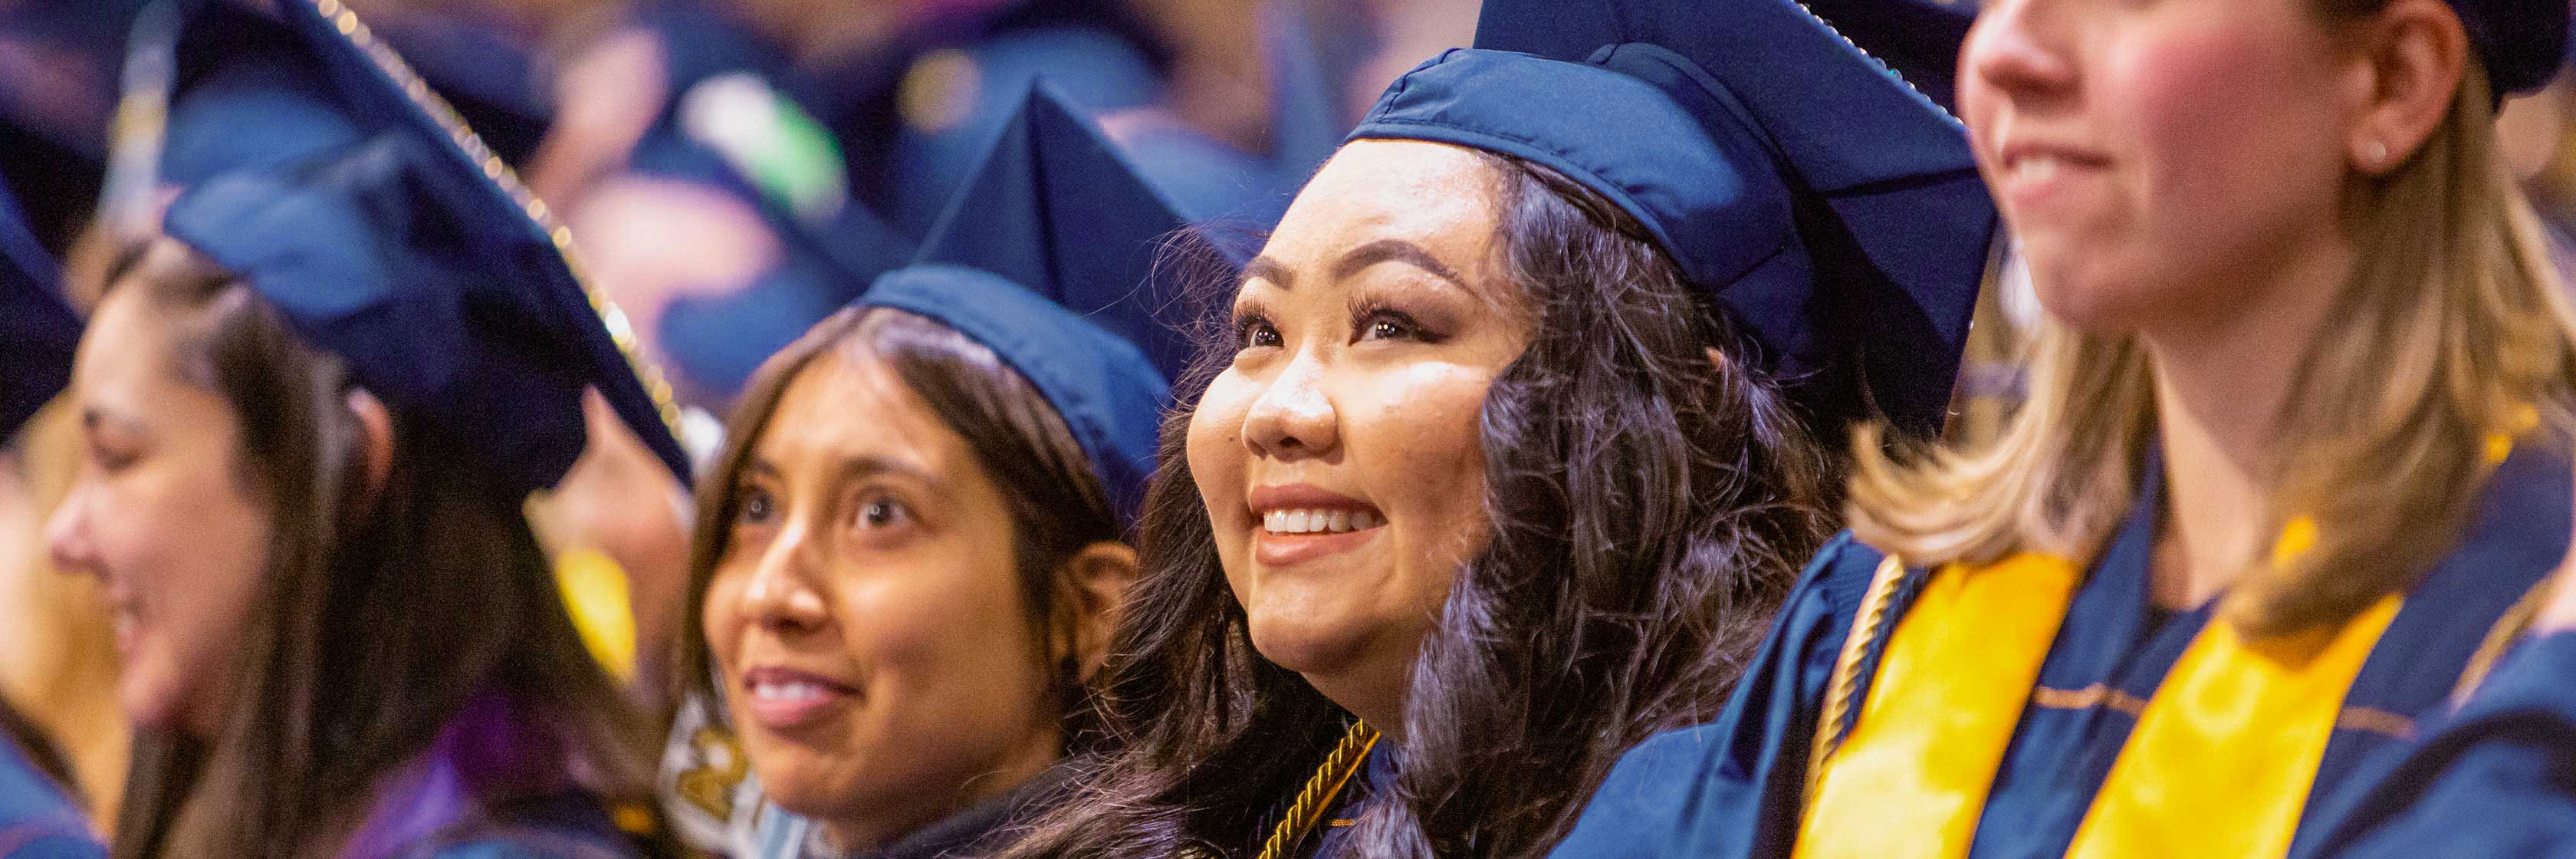 Graduate smiling during commencement.